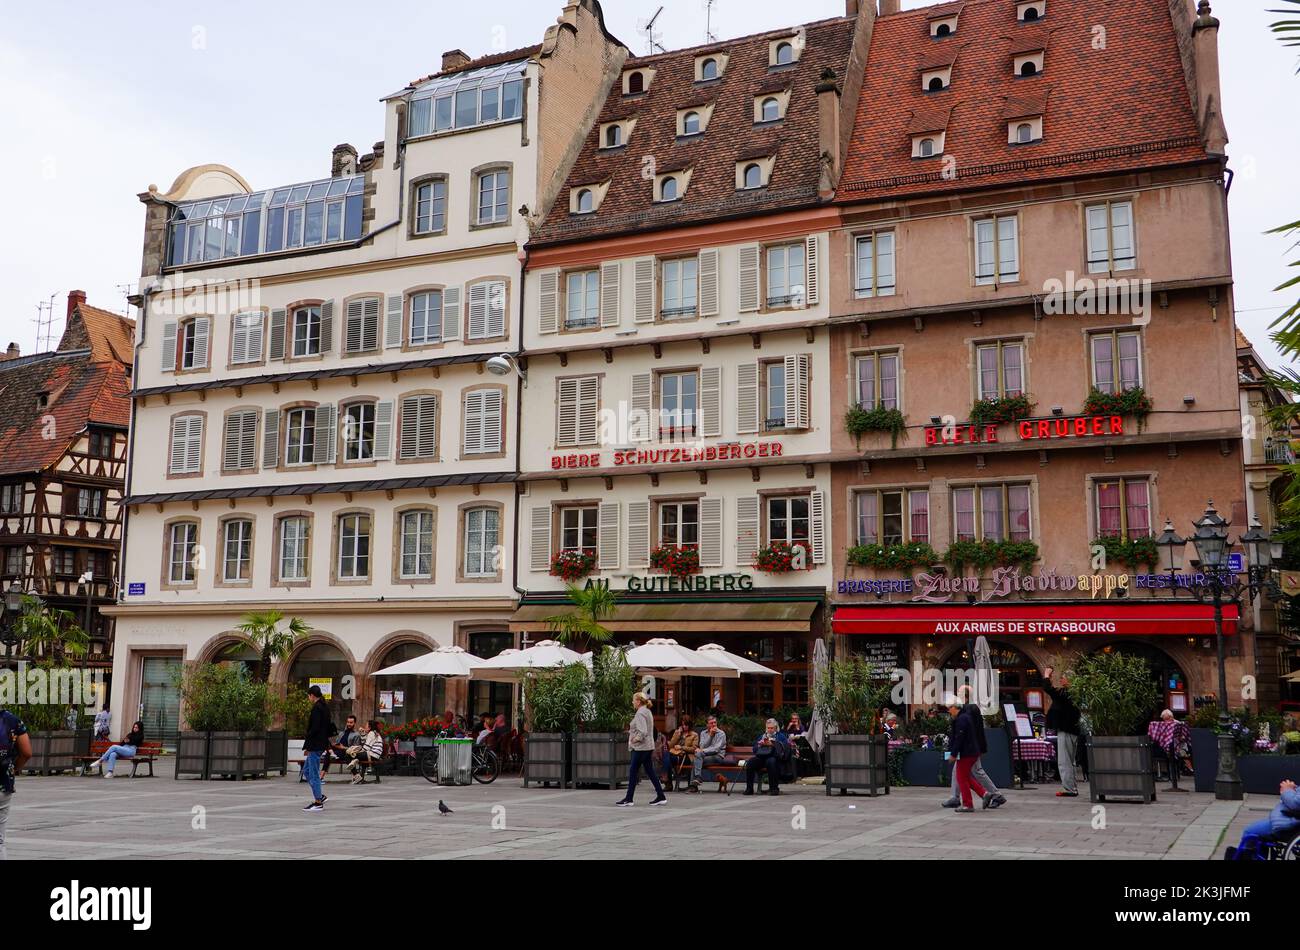 People sitting, walking, in front of buildings with architecture distinctive of the Alsace region, Place Gutenberg, Strasbourg, France. Stock Photo